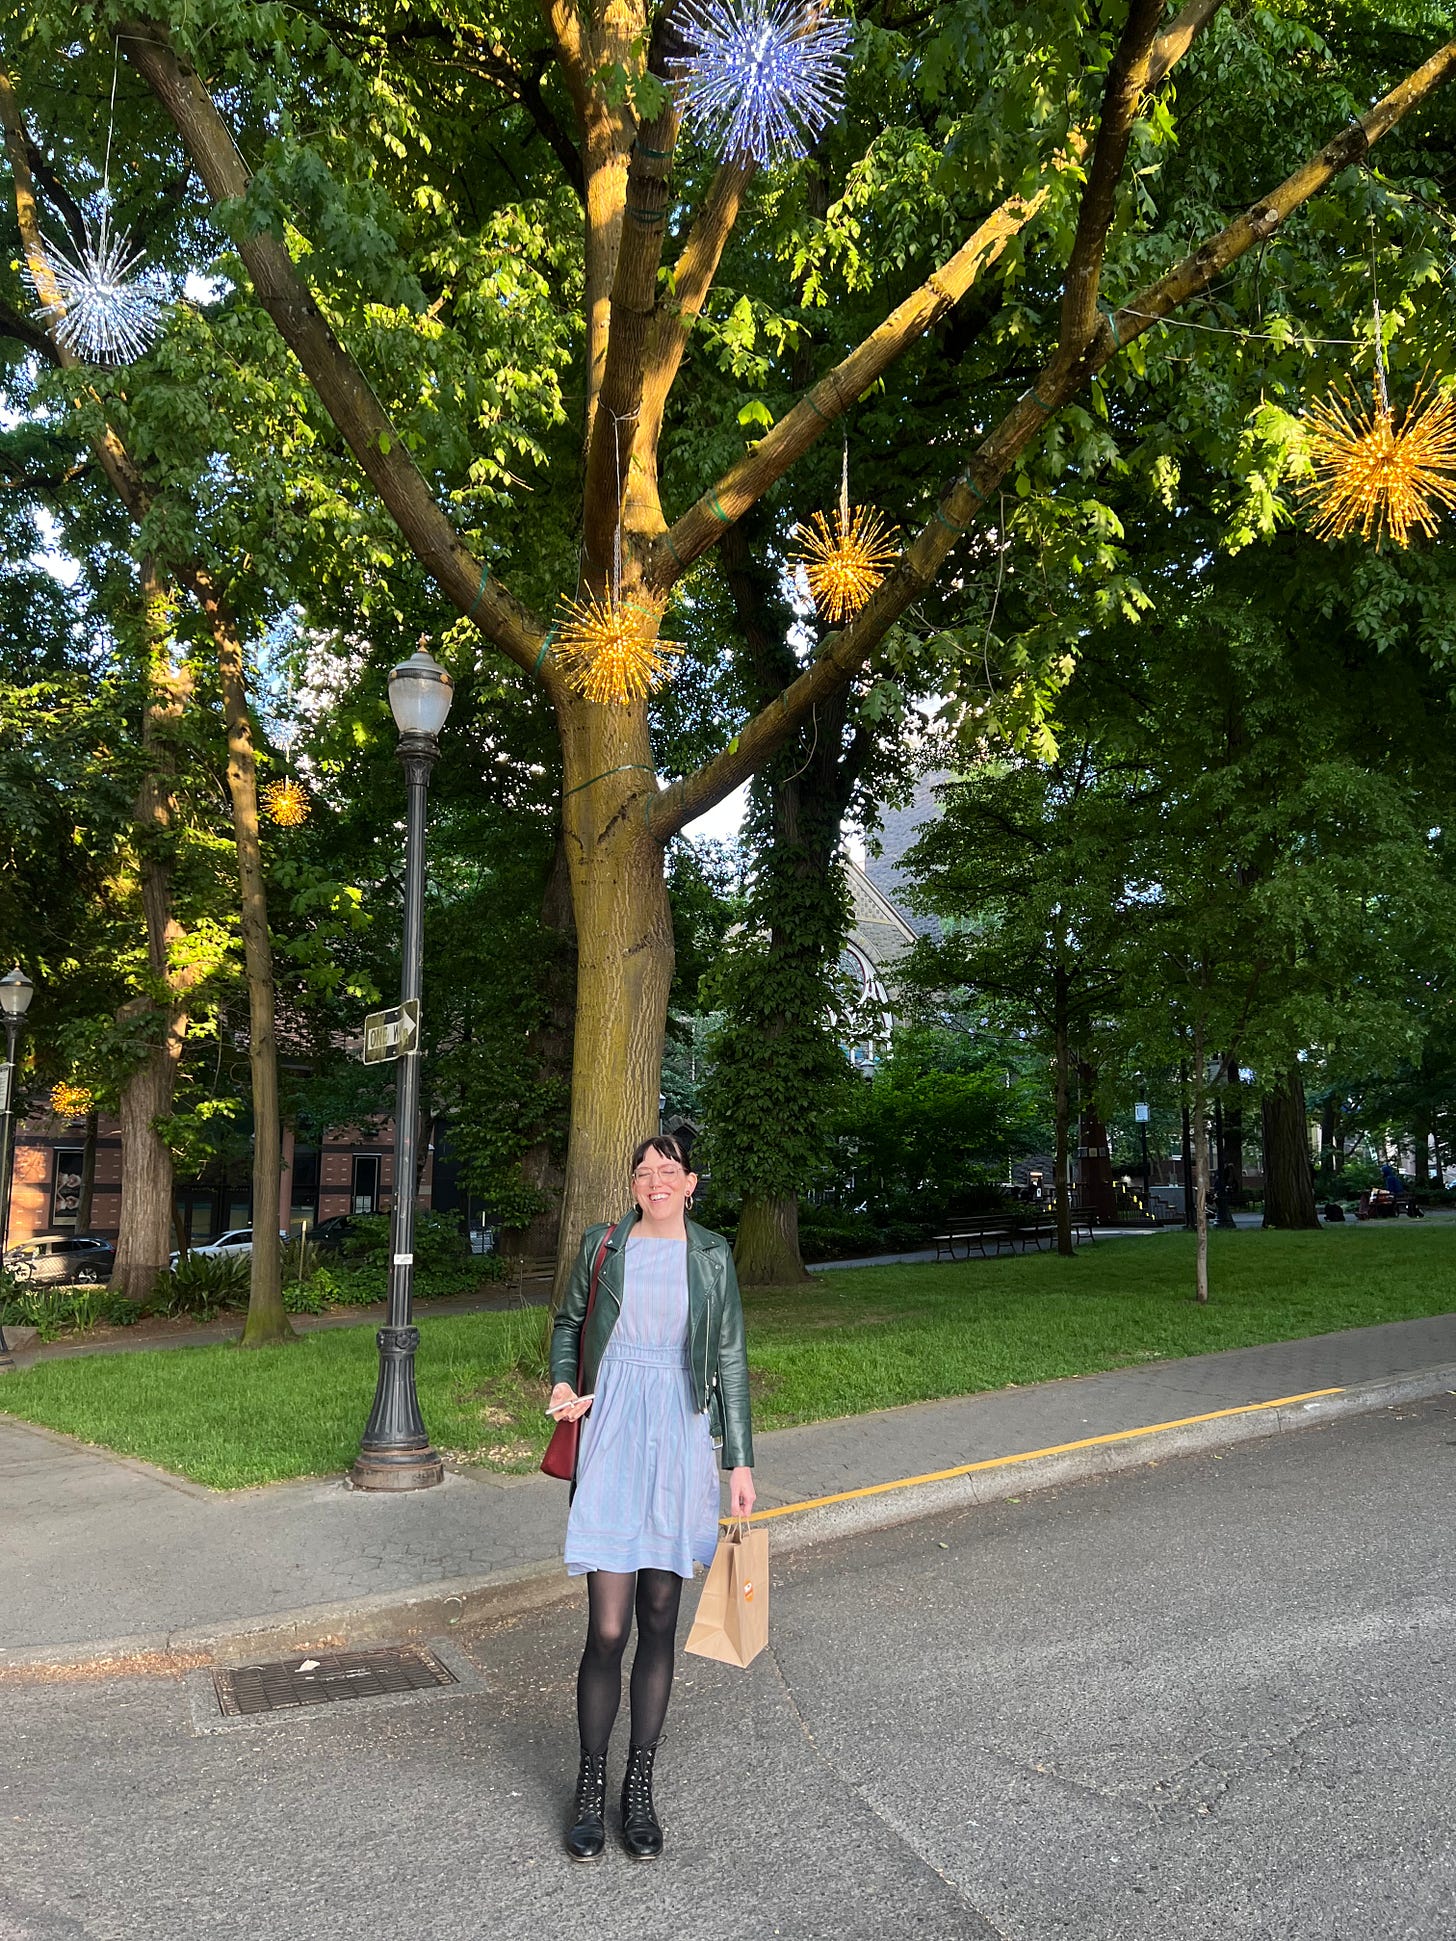 Emme stands in a blue dress and tights under a tree in the park blocks in downtown portland. Twinkling light globes hang in the tree above her. The light is golden.